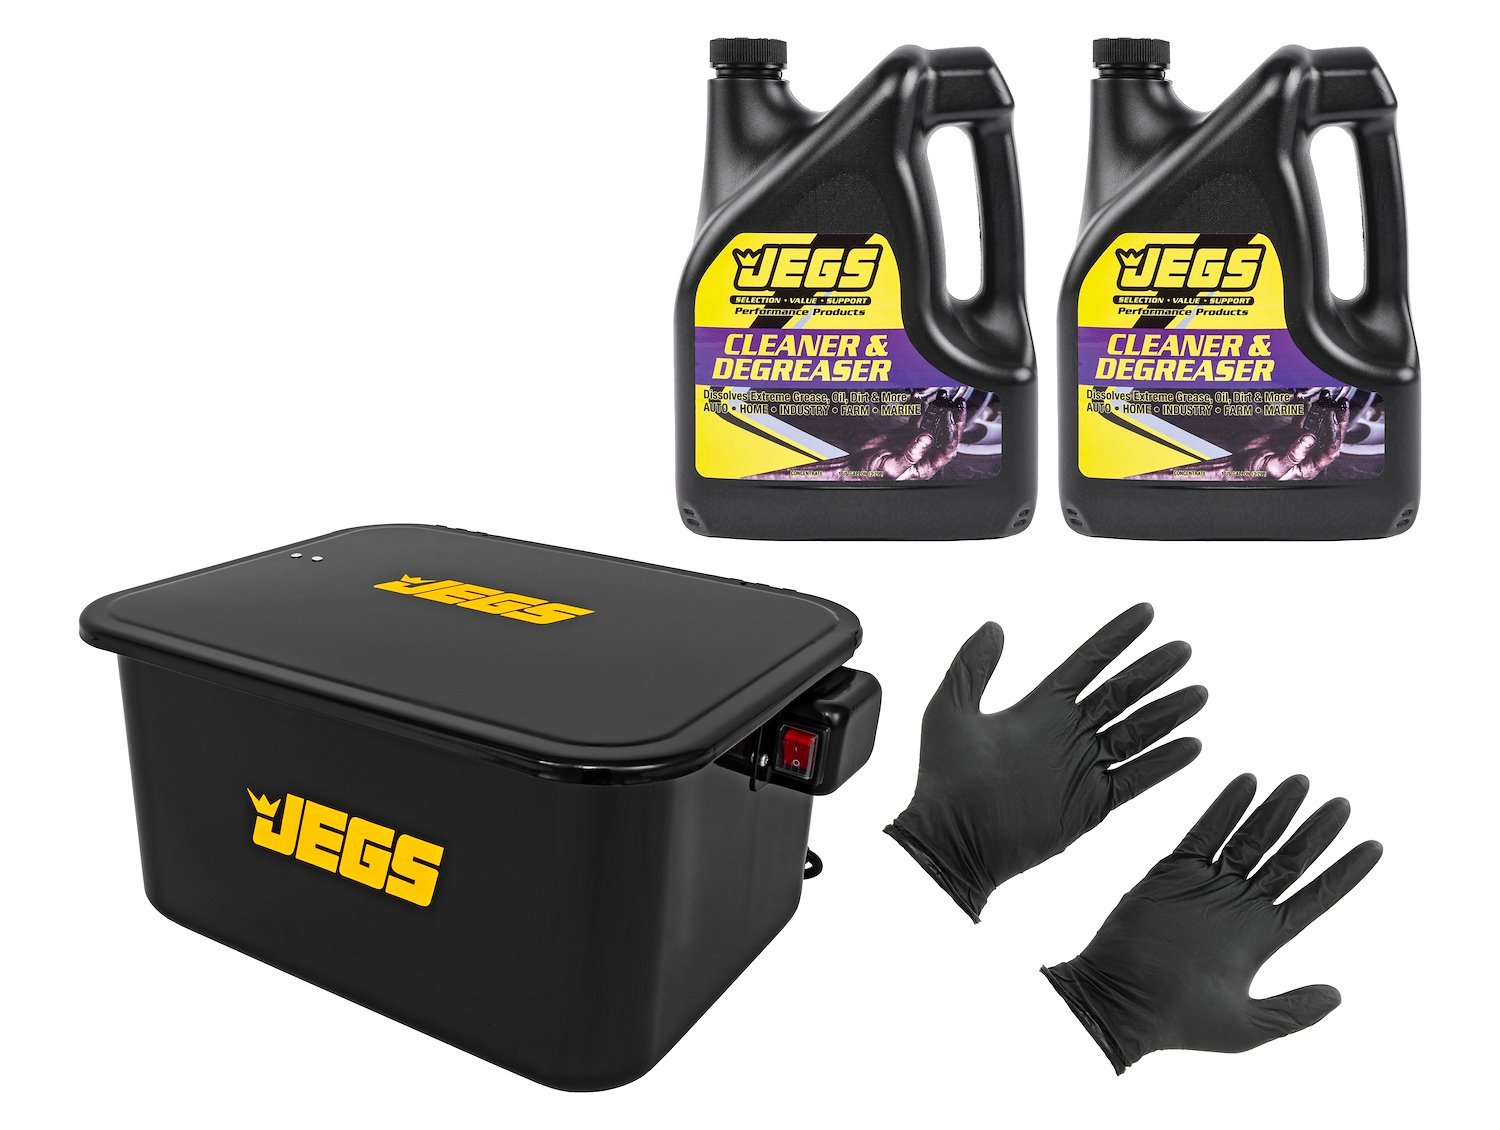 Portable Parts Washer Kit with 2 One Gallon Bottles Of Cleaner/Degreaser & X-Large Gloves [5-Gallon Tank]